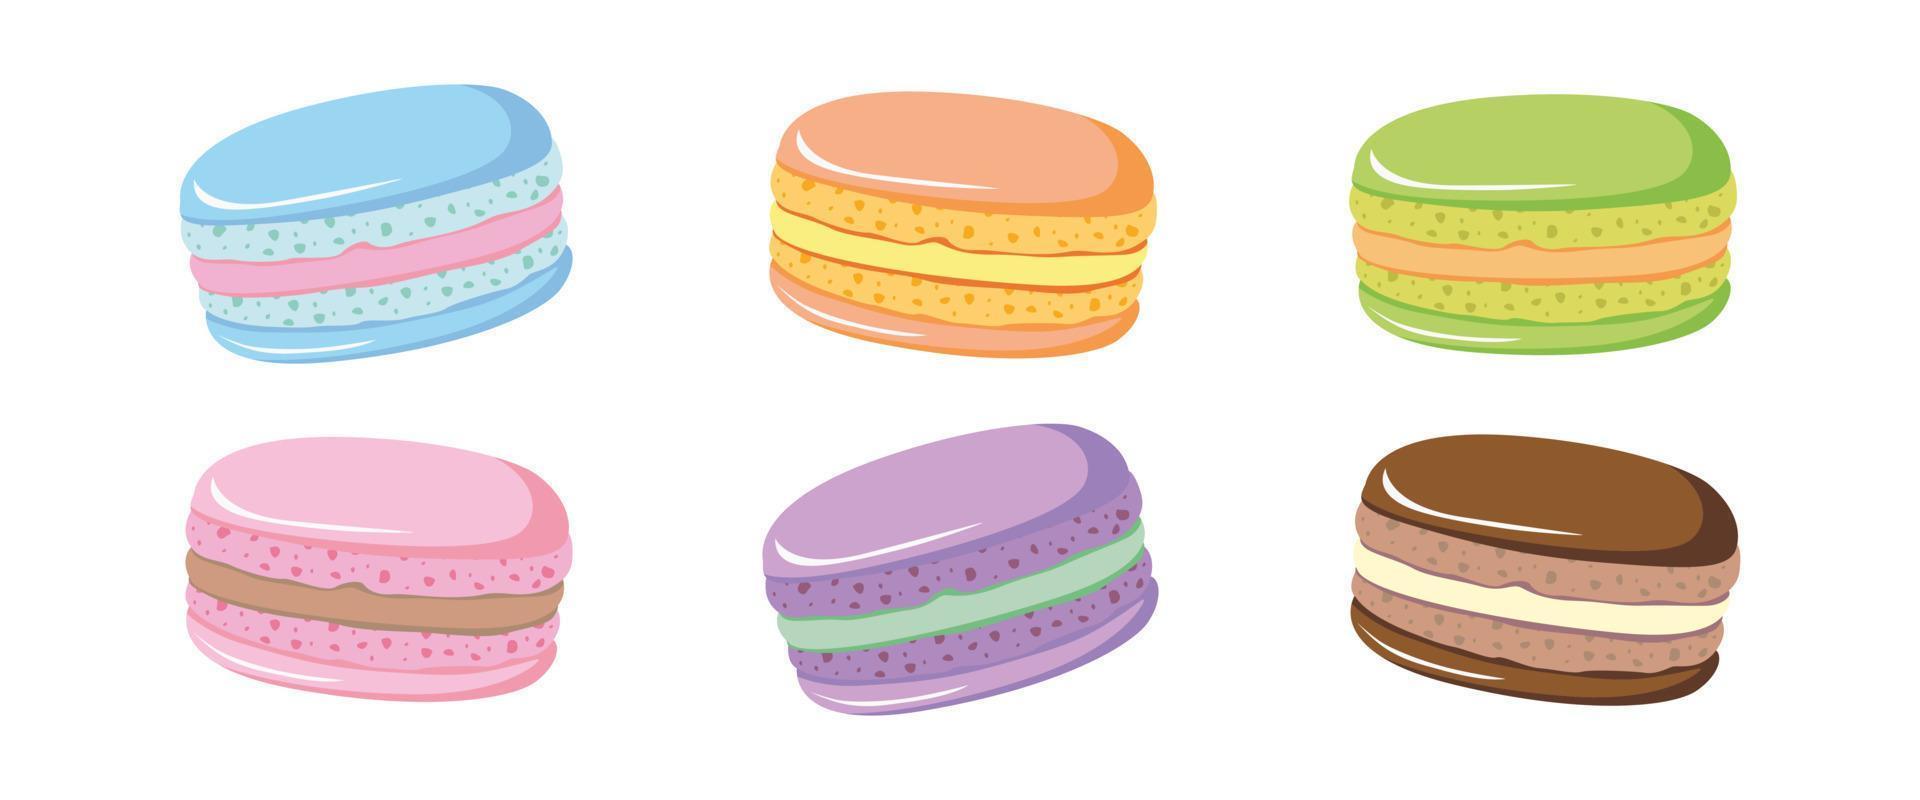 Set of cute French macaroon with different filling. Traditional macaron dessert. Little French cakes. Sweet cookies food illustration. Hand drawn cartoon flat illustration. vector